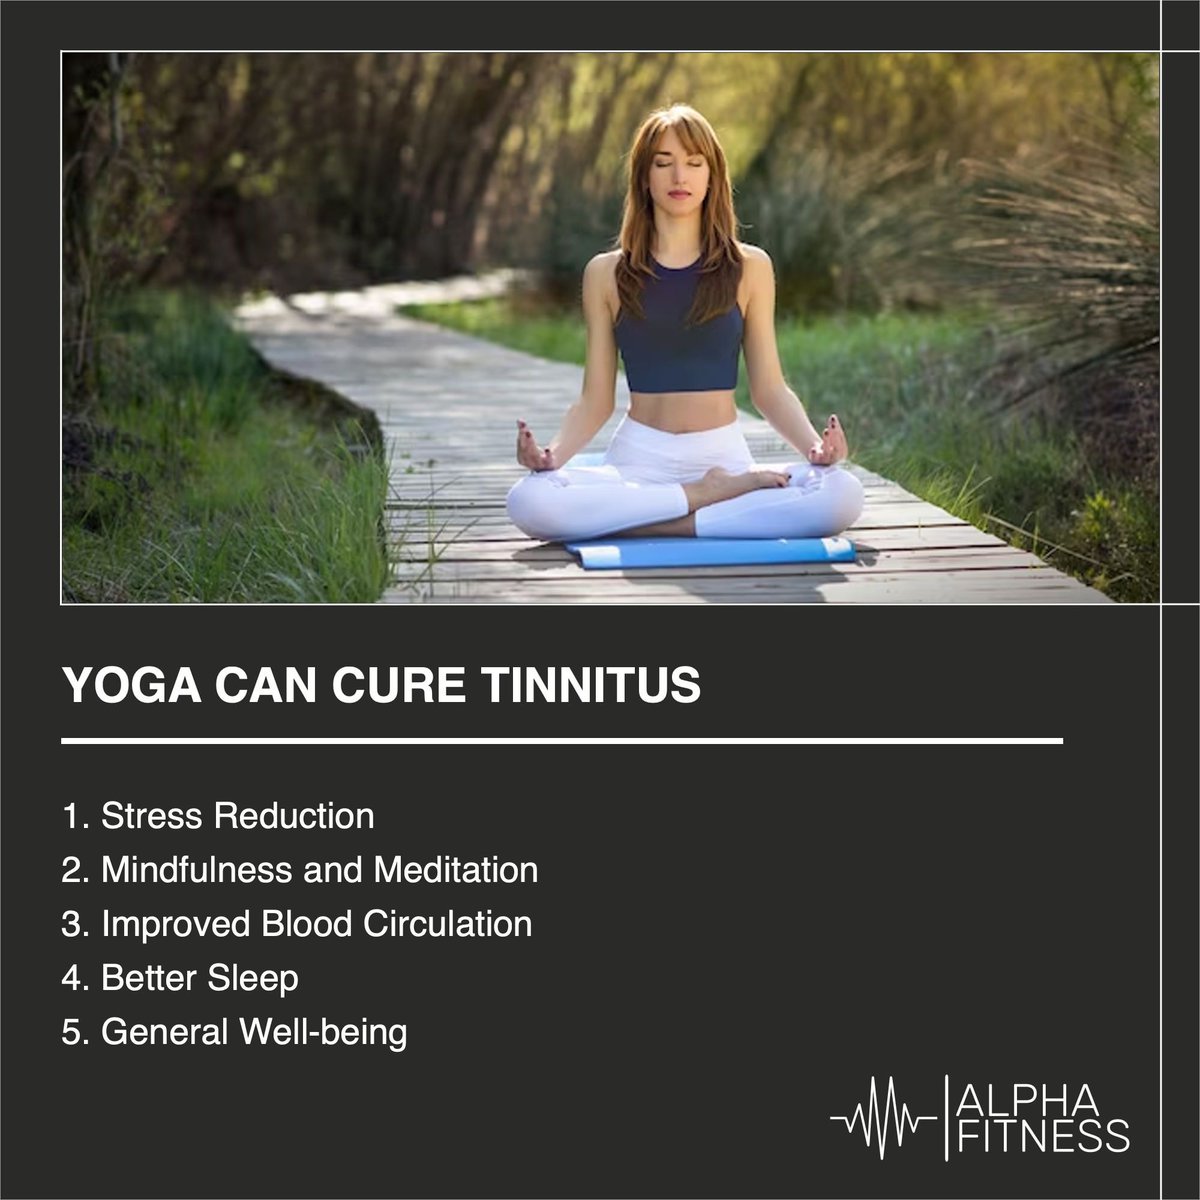 Yoga can cure tinnitus.
Yoga is a holistic practice that combines physical postures, breathing exercises, meditation, and relaxation techniques to promote over...
#StressReduction #BloodCirculation #Tinnitus,Yoga #Diseases #AlphaFitness #Fitness #Health #AlphaFitness.Health